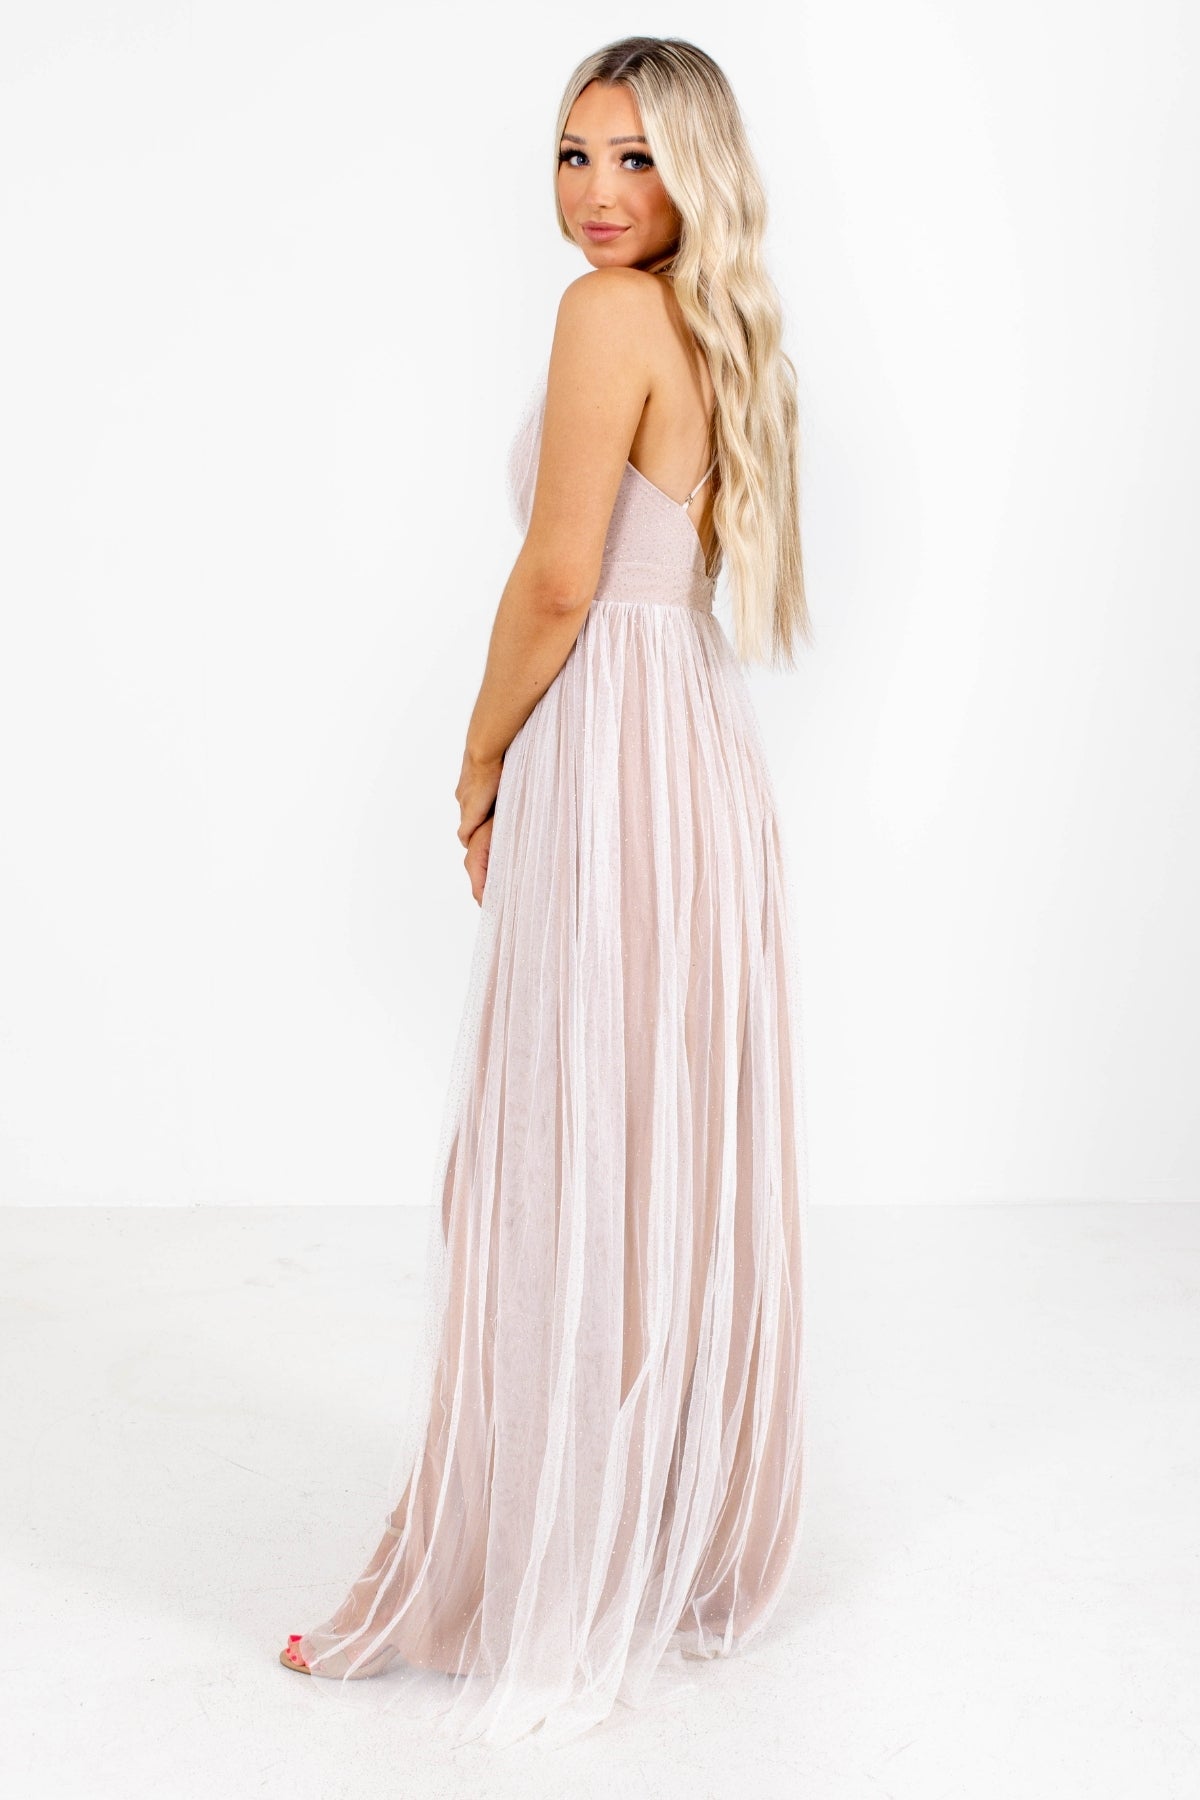 Maxi Dress with Sparkled White Overlay.